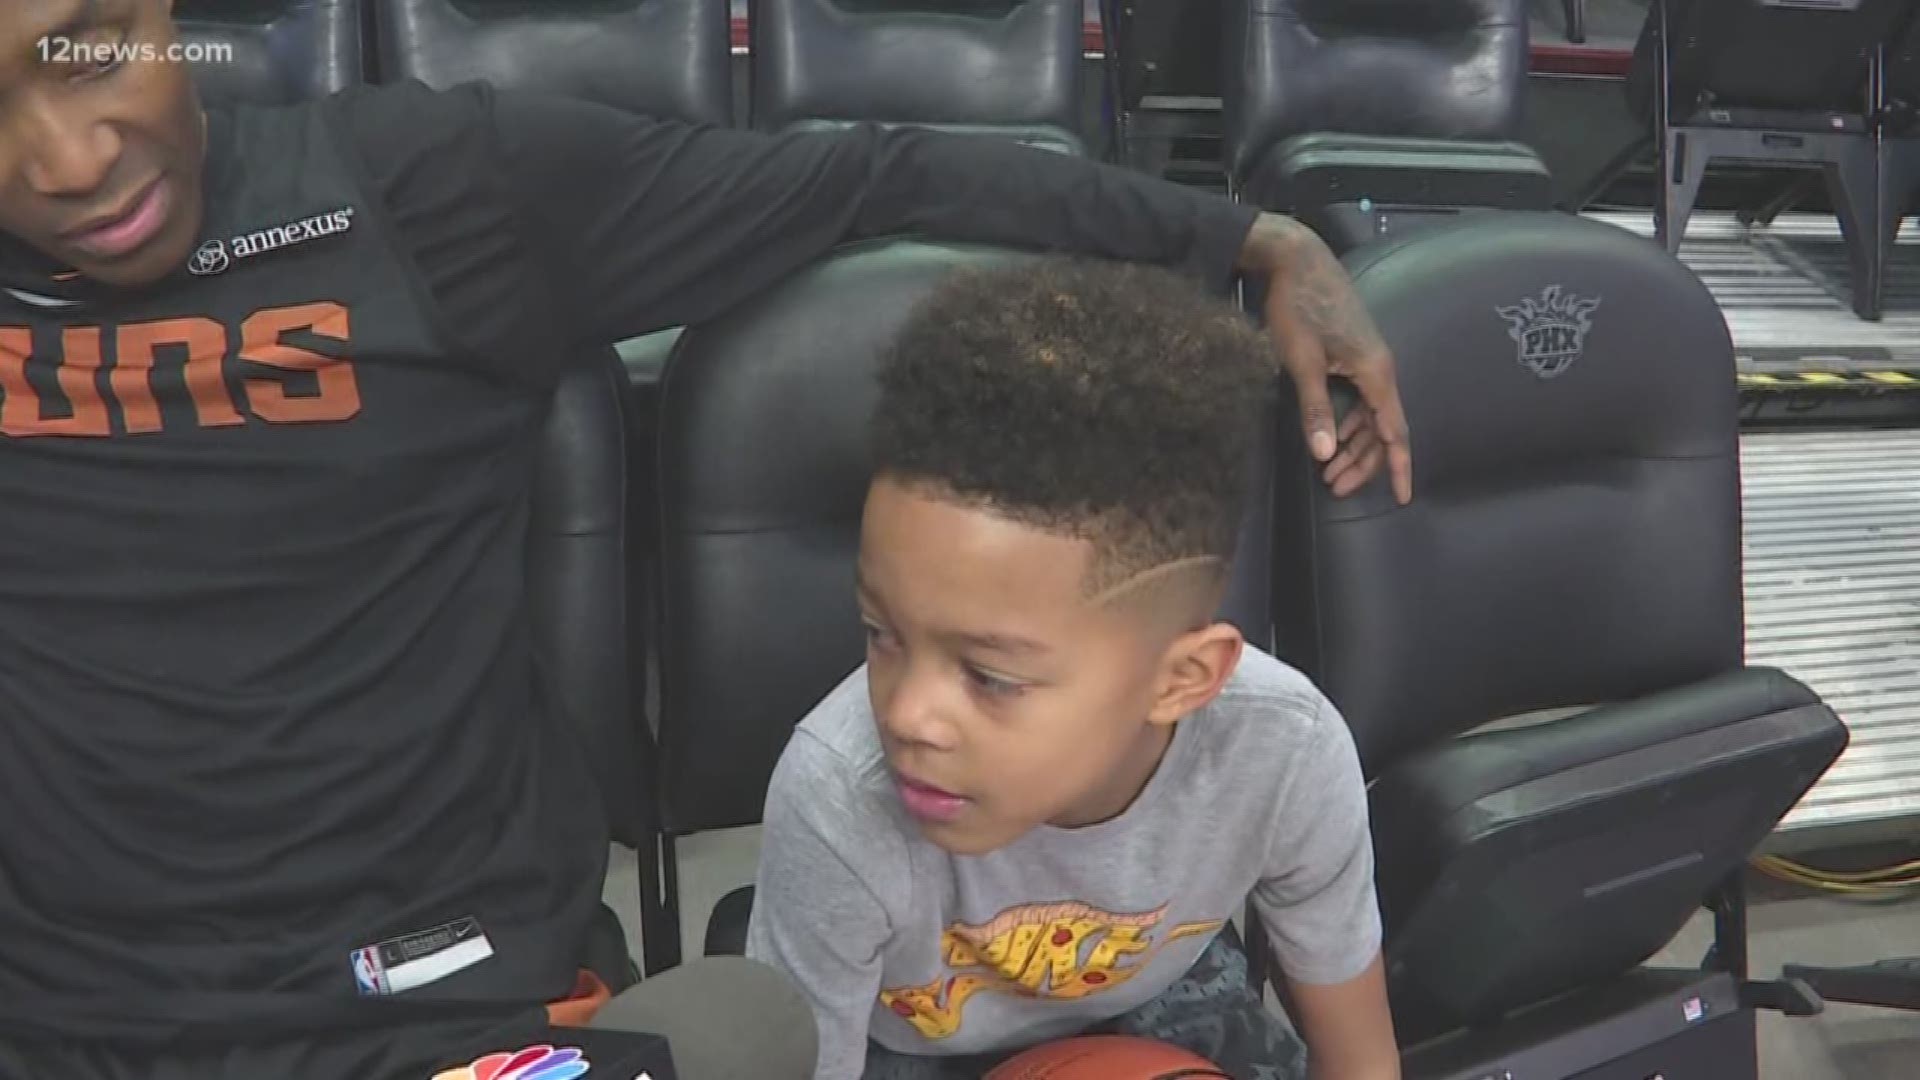 Crawford will spend hours training with his son, J.J. as he hopes to grow into an NBA player himself someday.